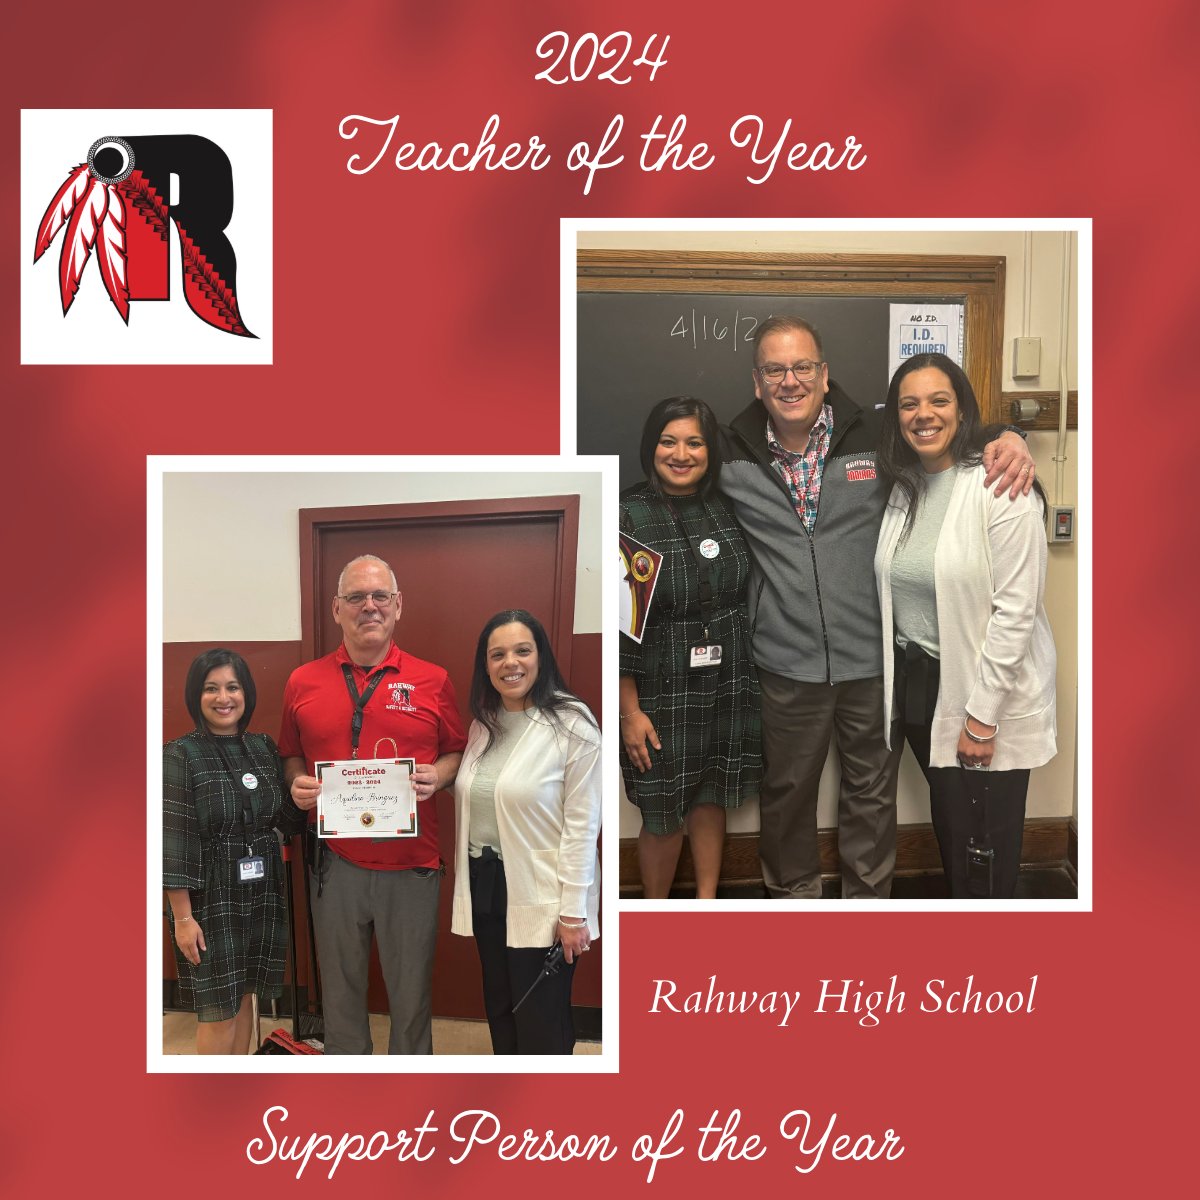 Congratulations to Mr. Radler, our Teacher of the Year, and Mr. Bringuez, our Support Person of the Year! Your continued efforts create a positive impact on the learning environment at Rahway High School. #RHSBelievesInSuccess